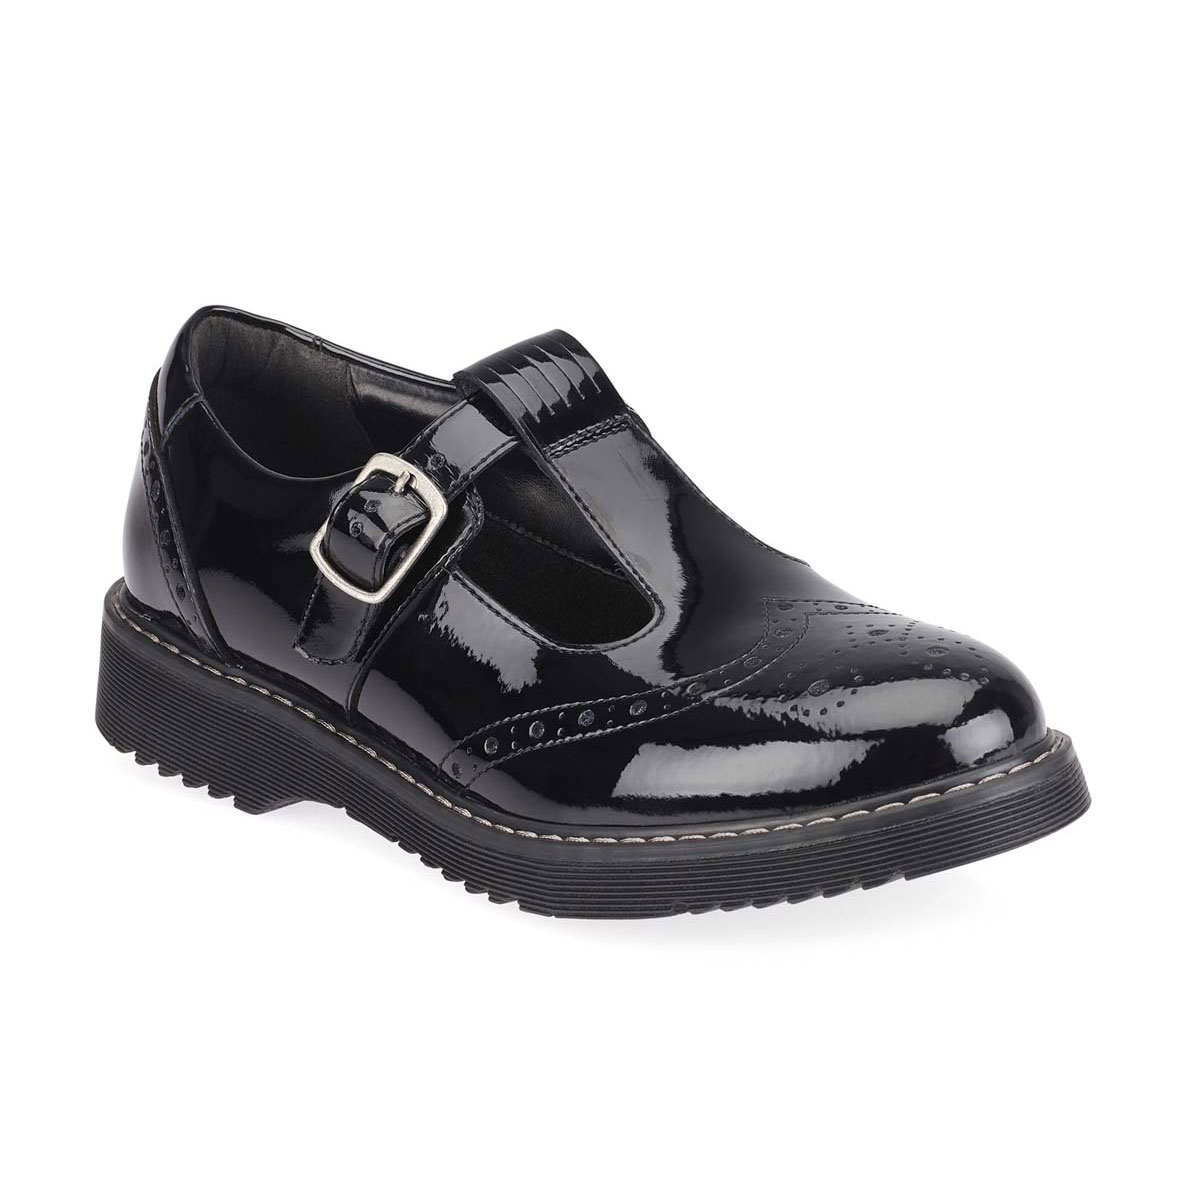 Start Rite - F Imagine T Bar In Black Patent 3510-3 In Size 35 In Plain Black Patent For School Girls Shoes  In Black Patent For kids